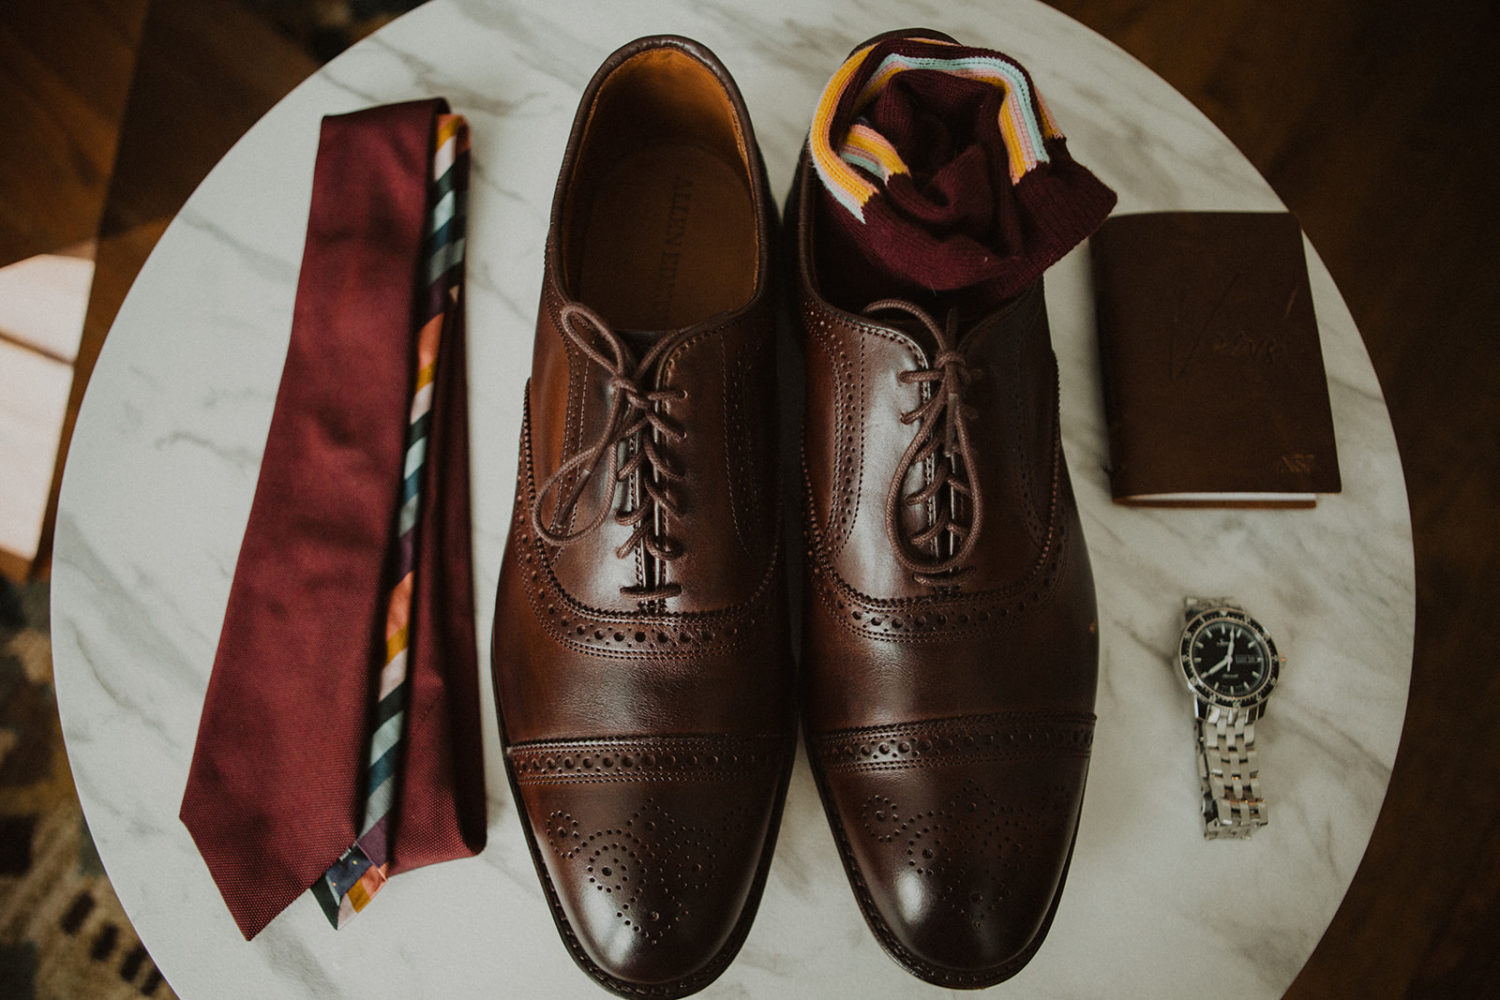 Groom's shoes and accessories flat lay